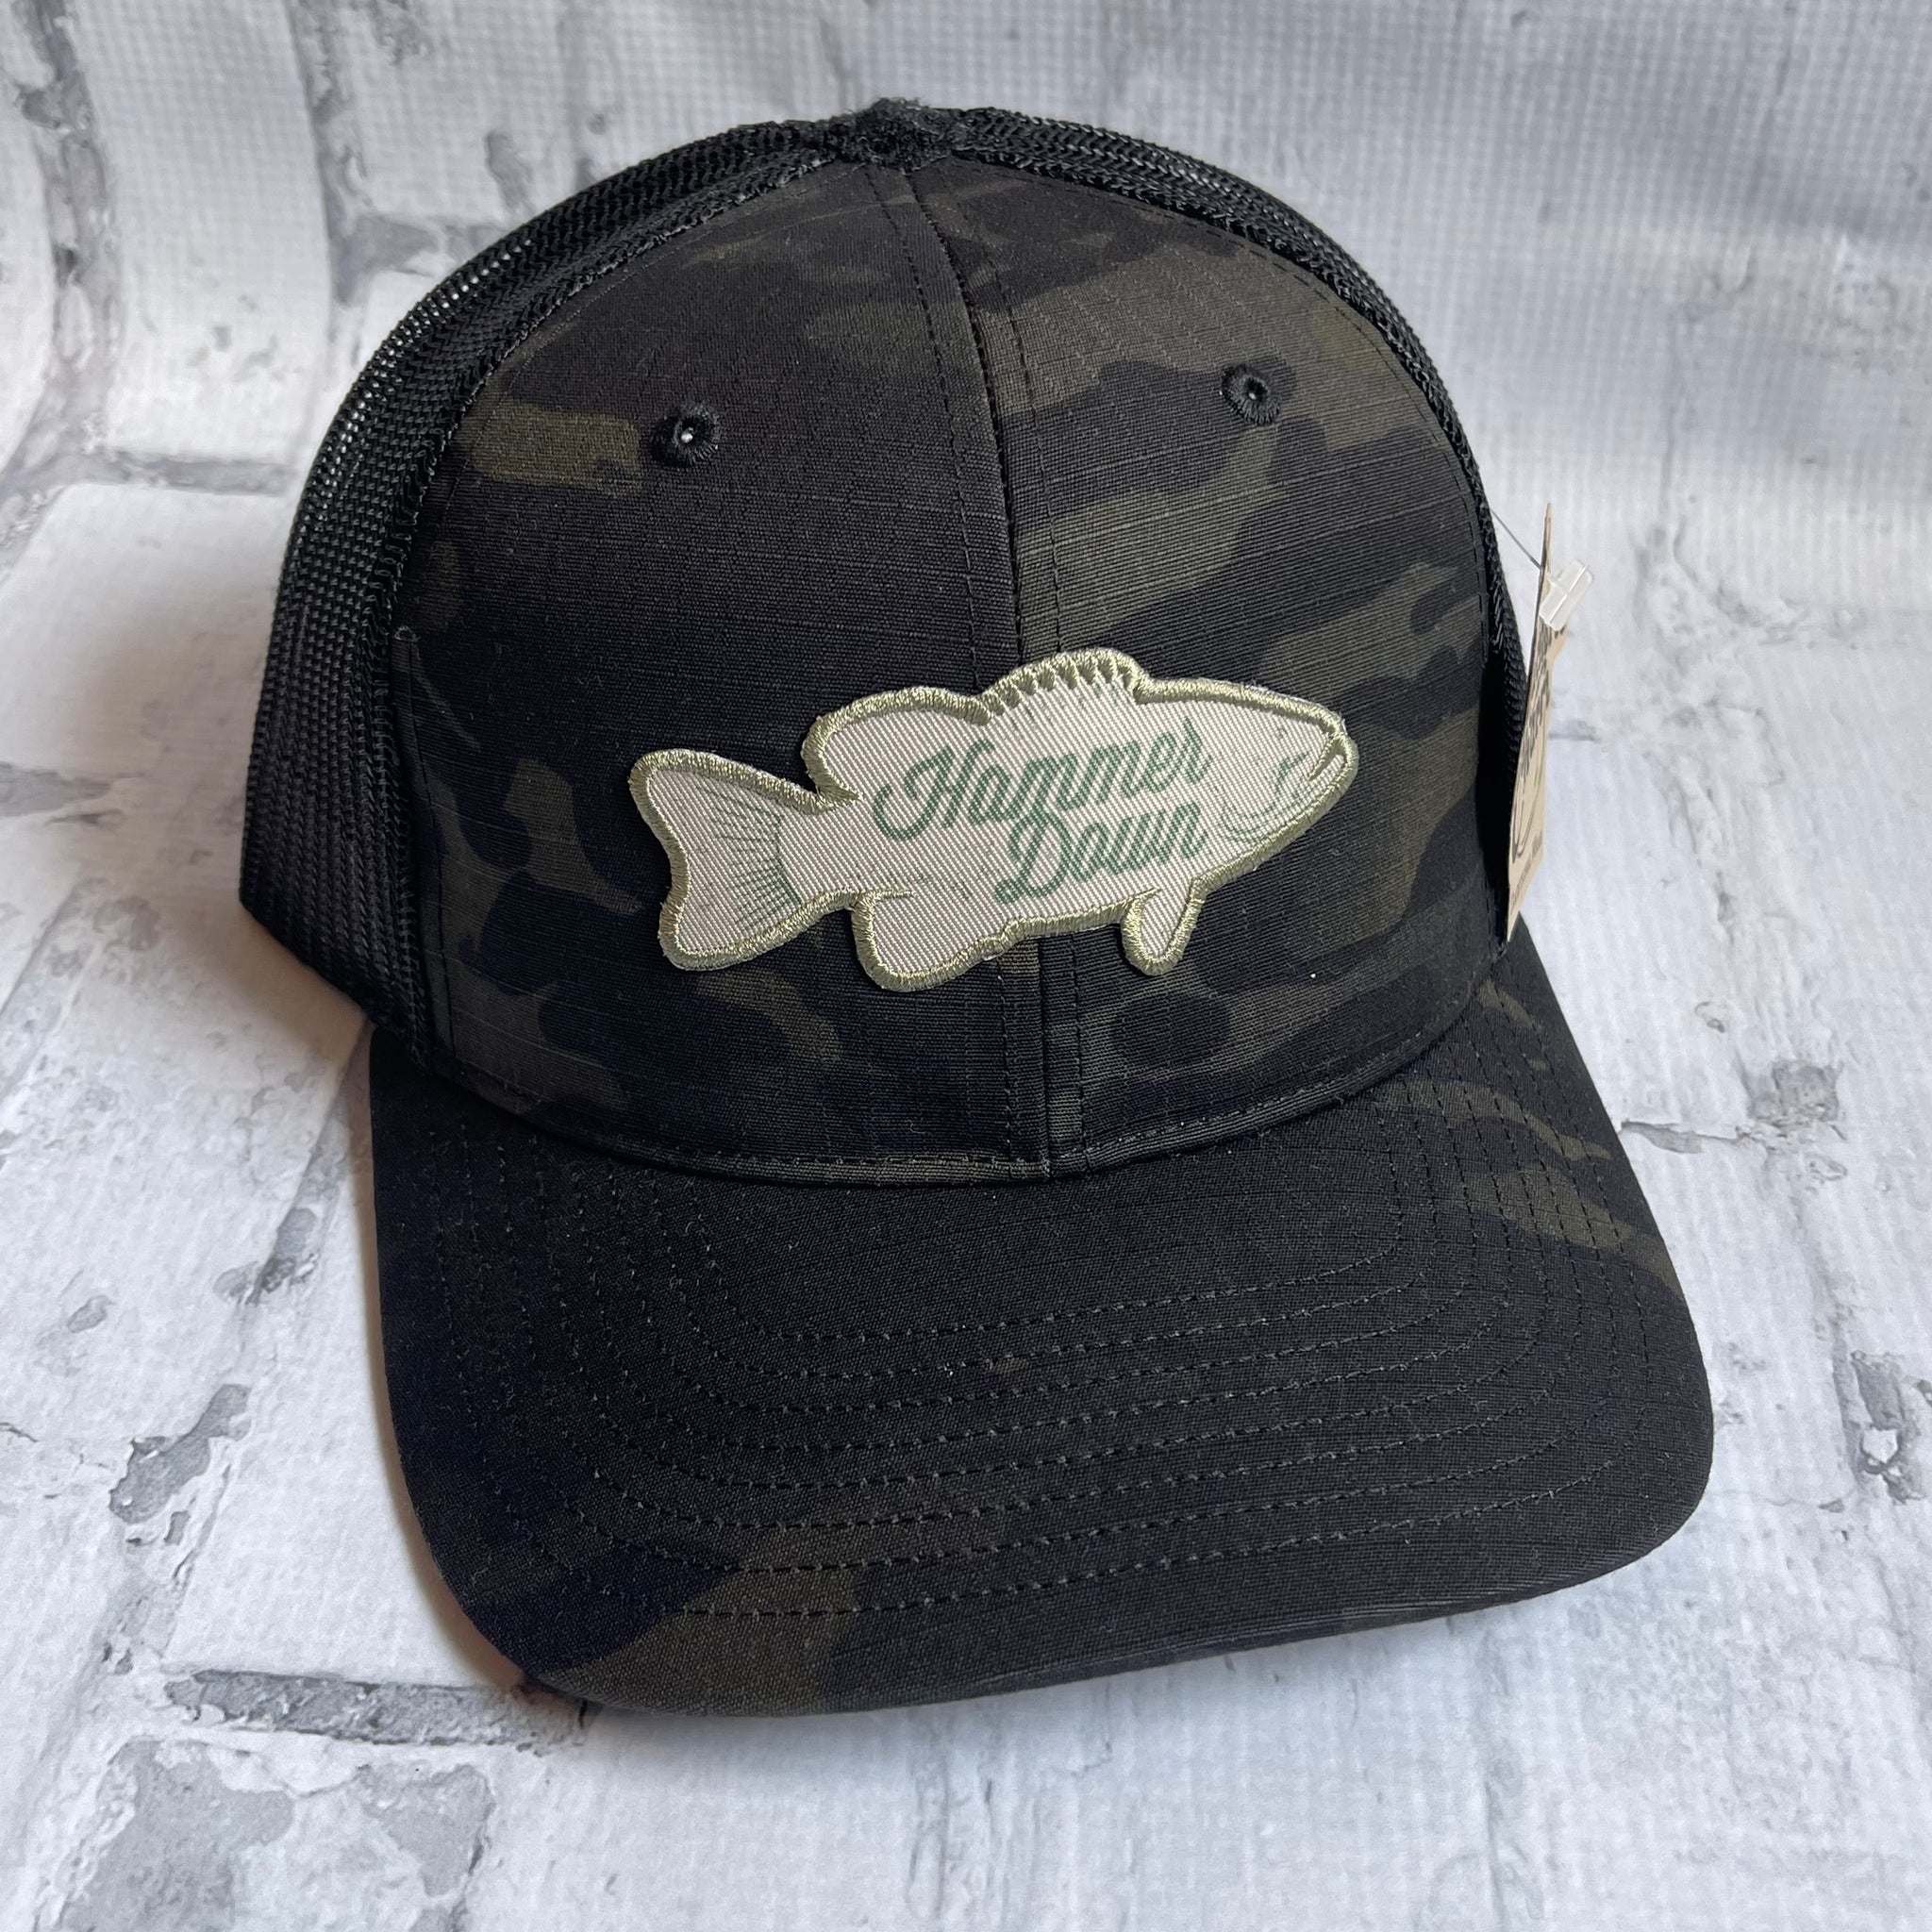 Hammer Down "Trout" Hat - Multicam with Woven Patch - Southern Charm "Shop The Charm"